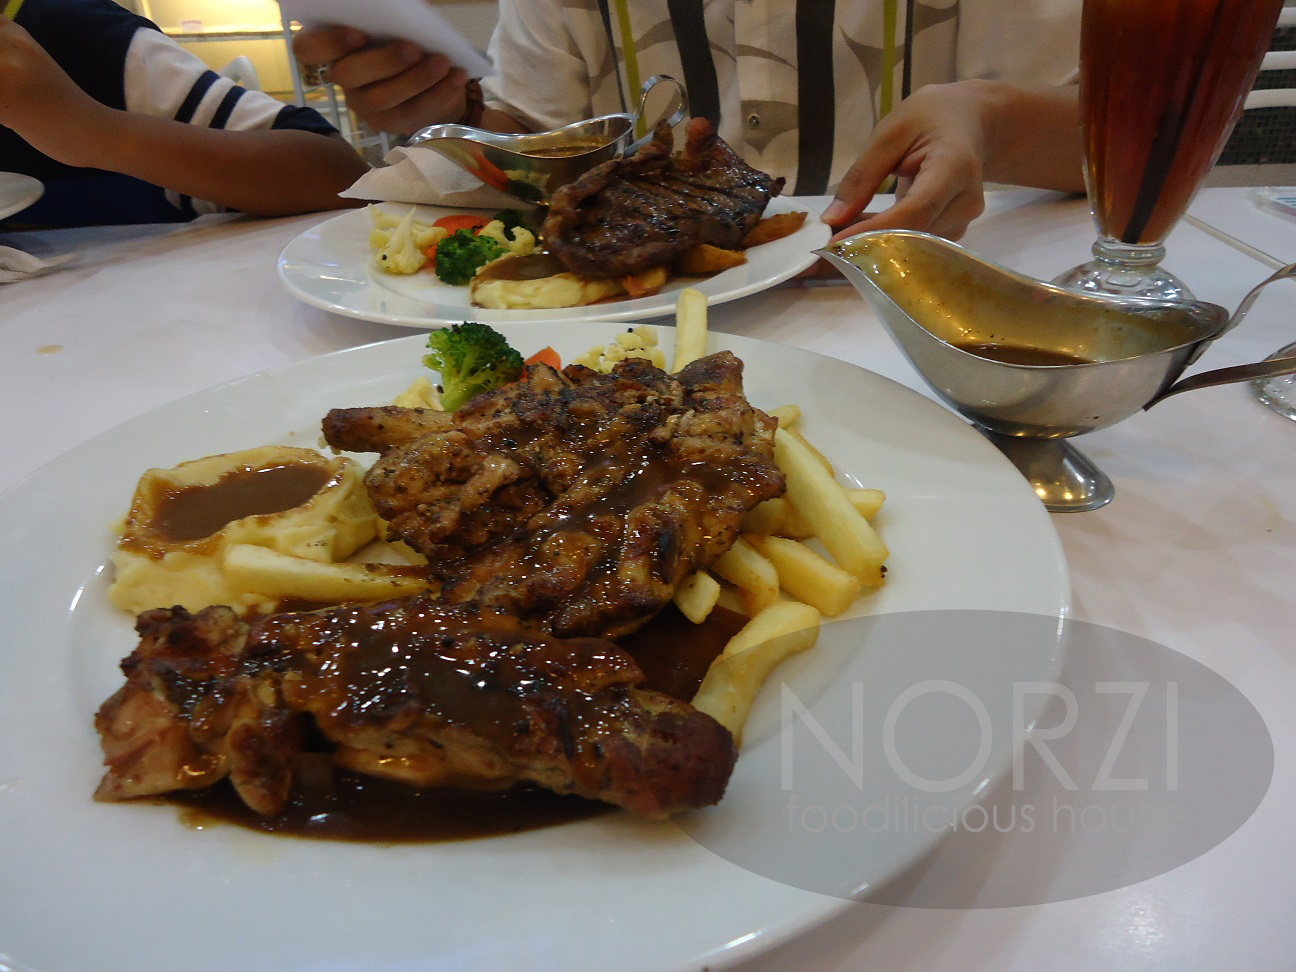 NORZI FOODILICIOUS HOUSE: June 2016